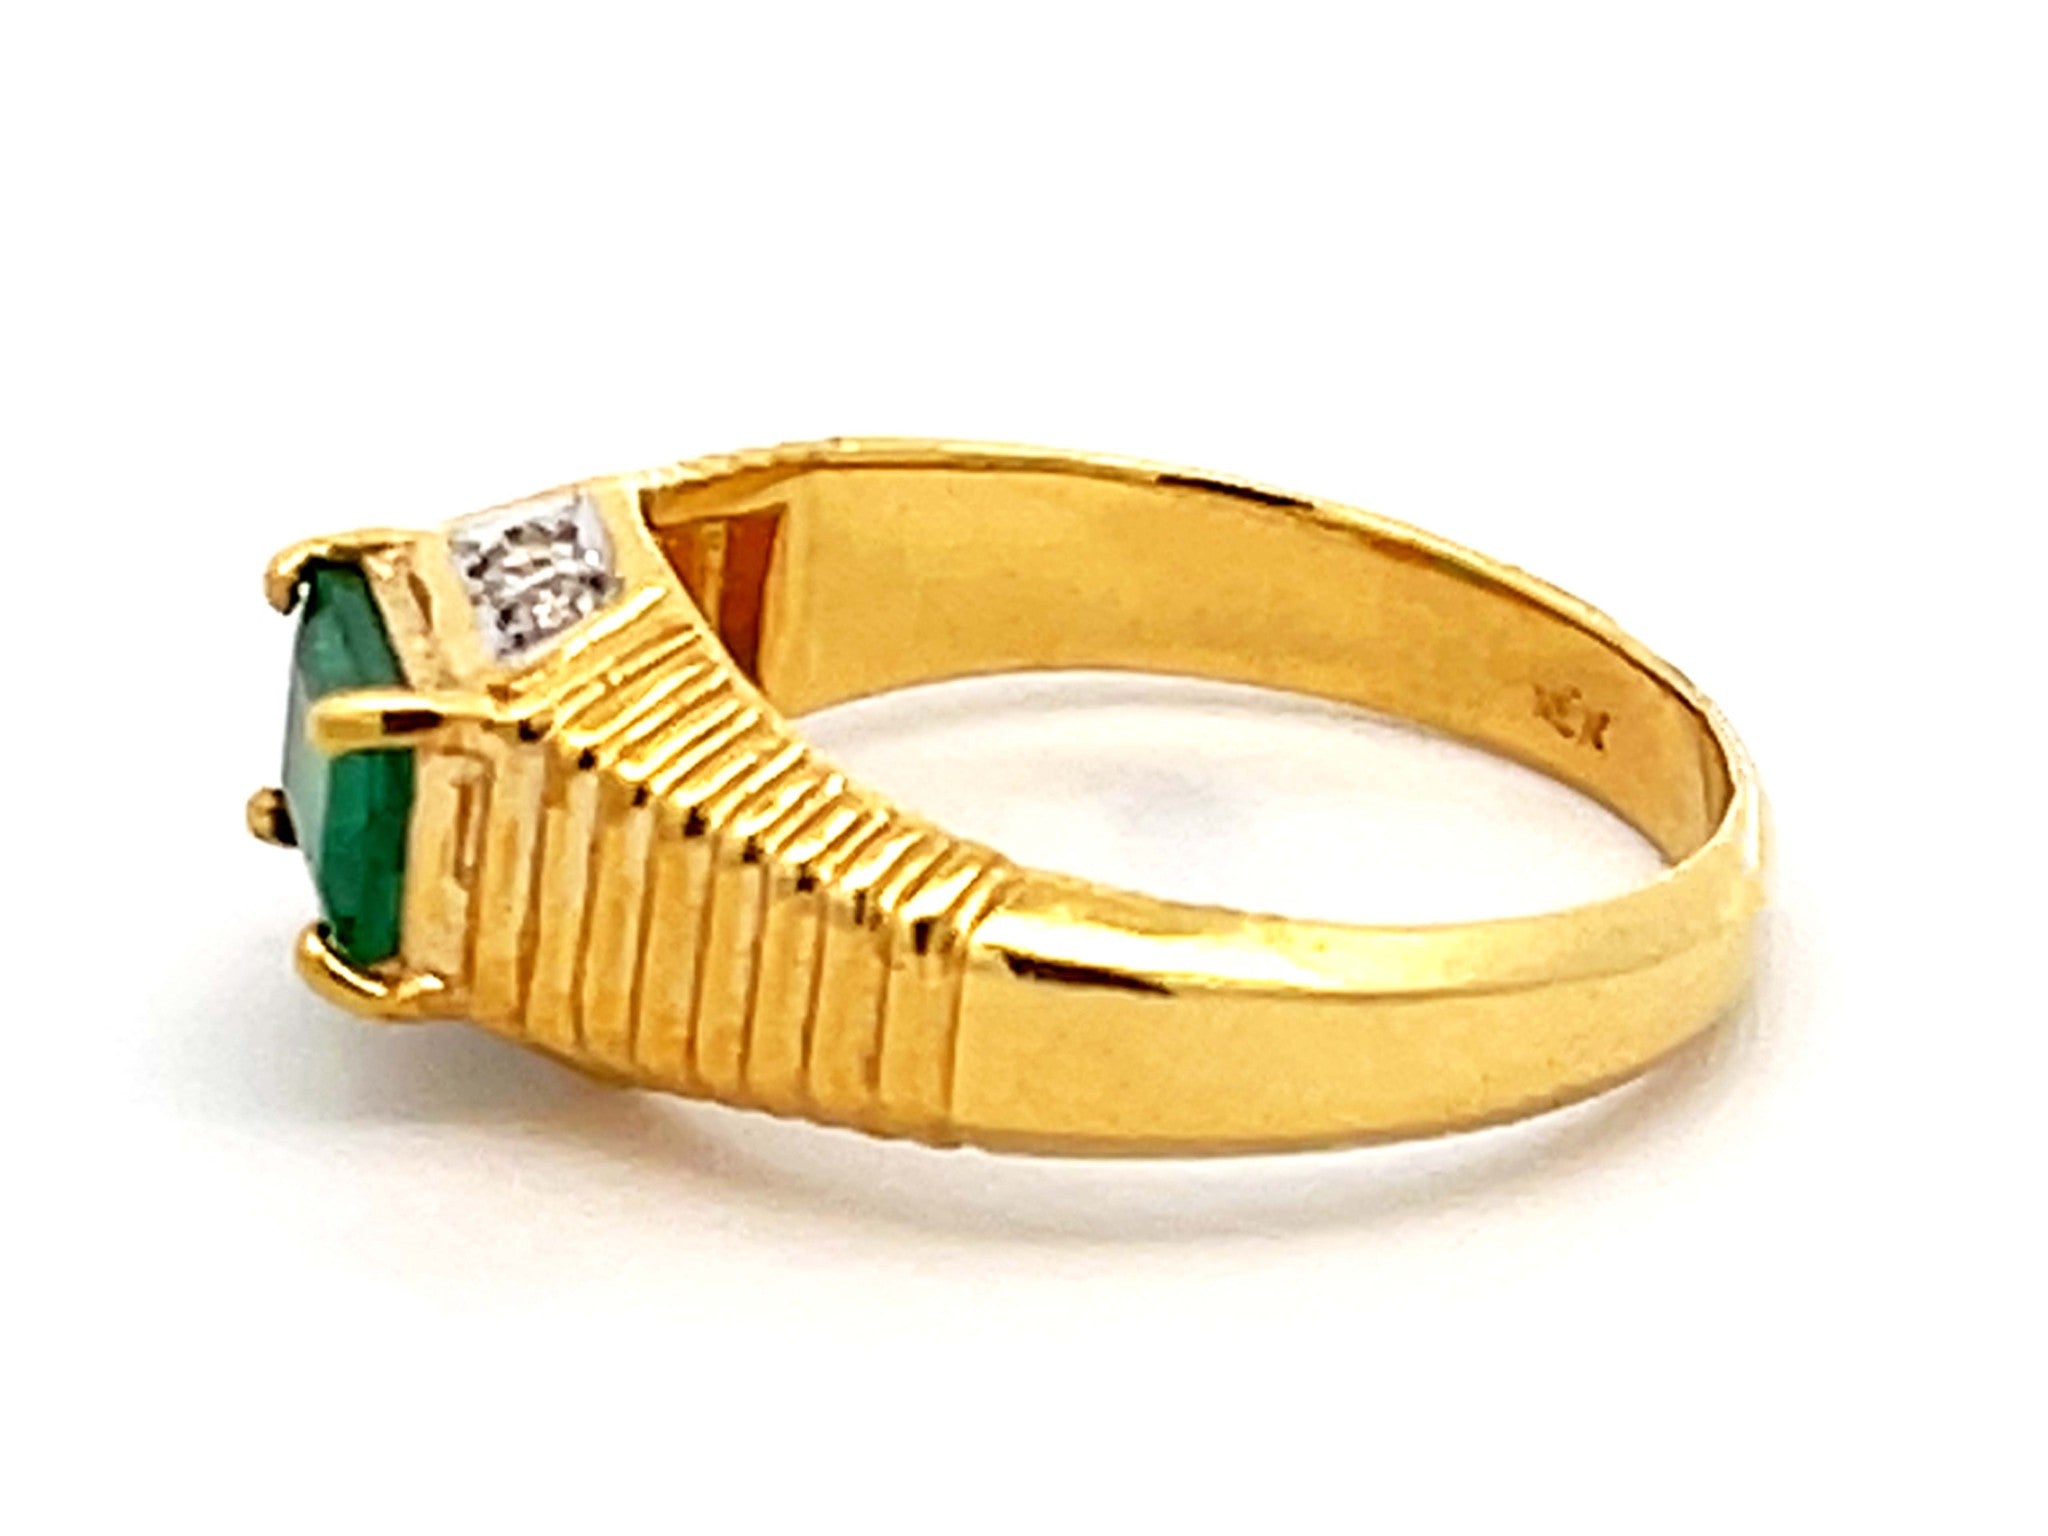 Vintage Green Emerald and Diamond Band Ring in 18k Yellow Gold